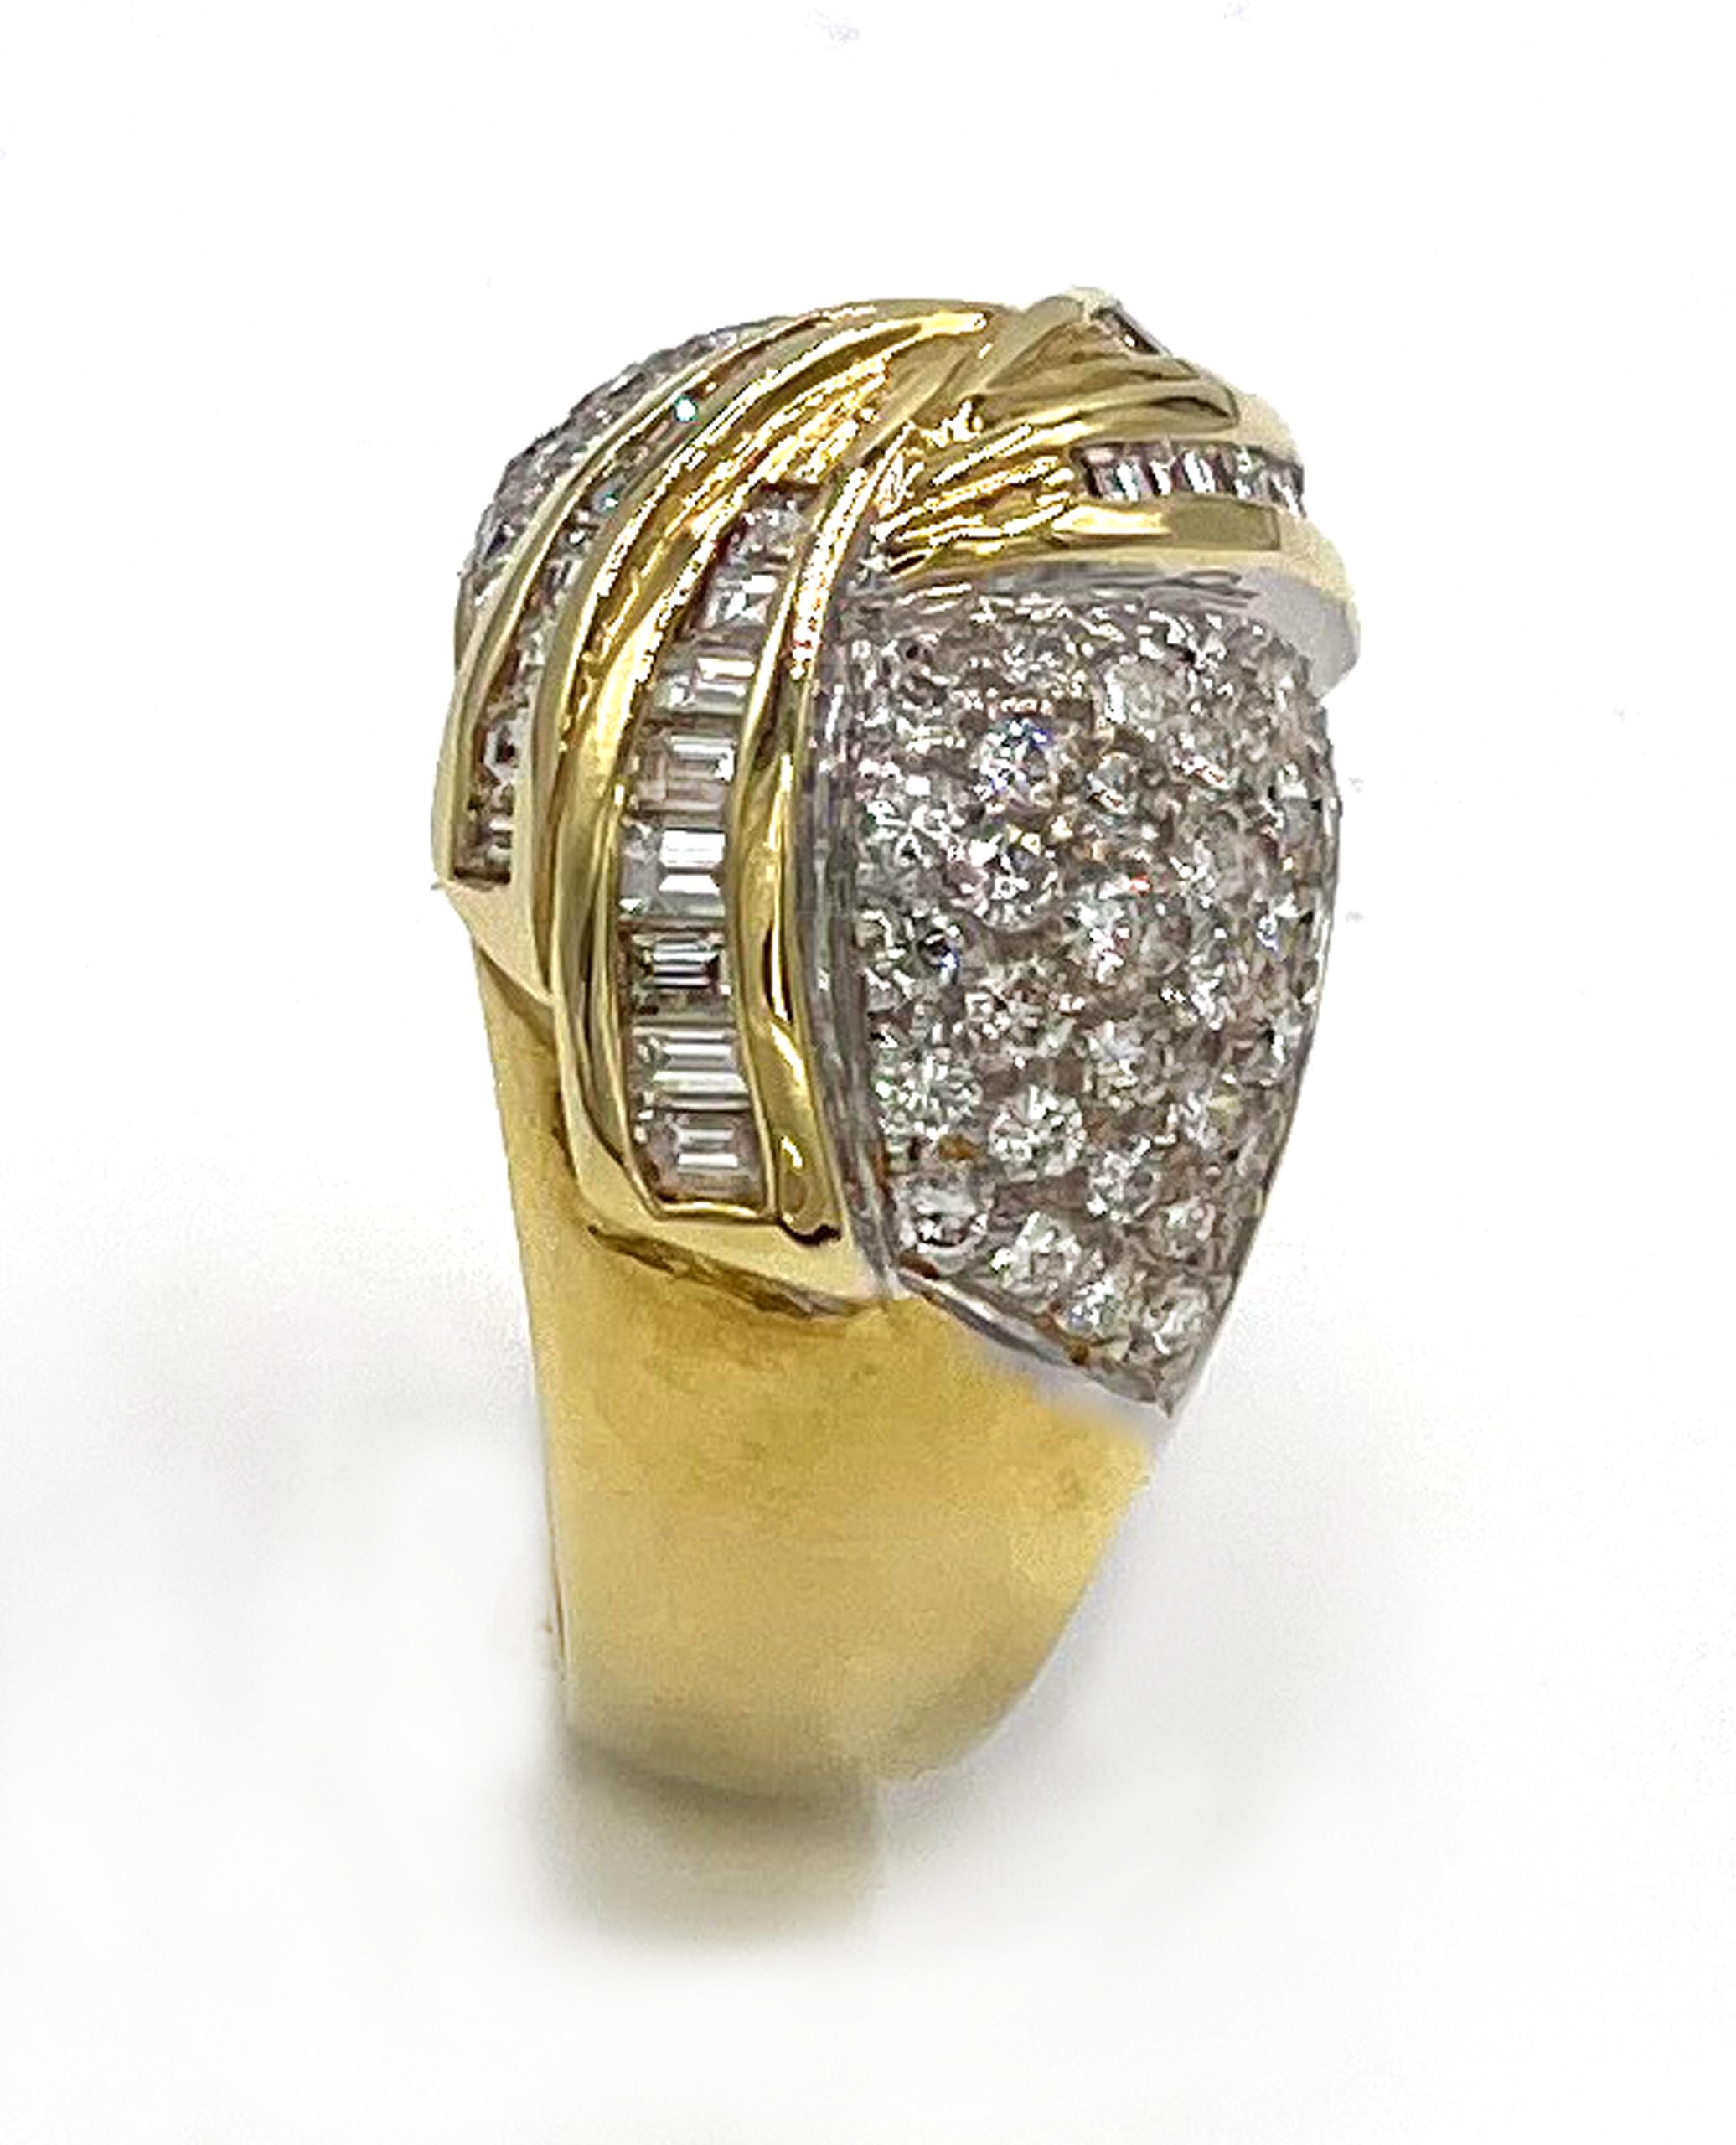 Vintage 18K two-tone dome ring with 21 baguette diamonds and 70 round diamonds totaling 2.15 carats. G/H color, VS clarity. (Created circa 1985)

-Finger size: 6.25